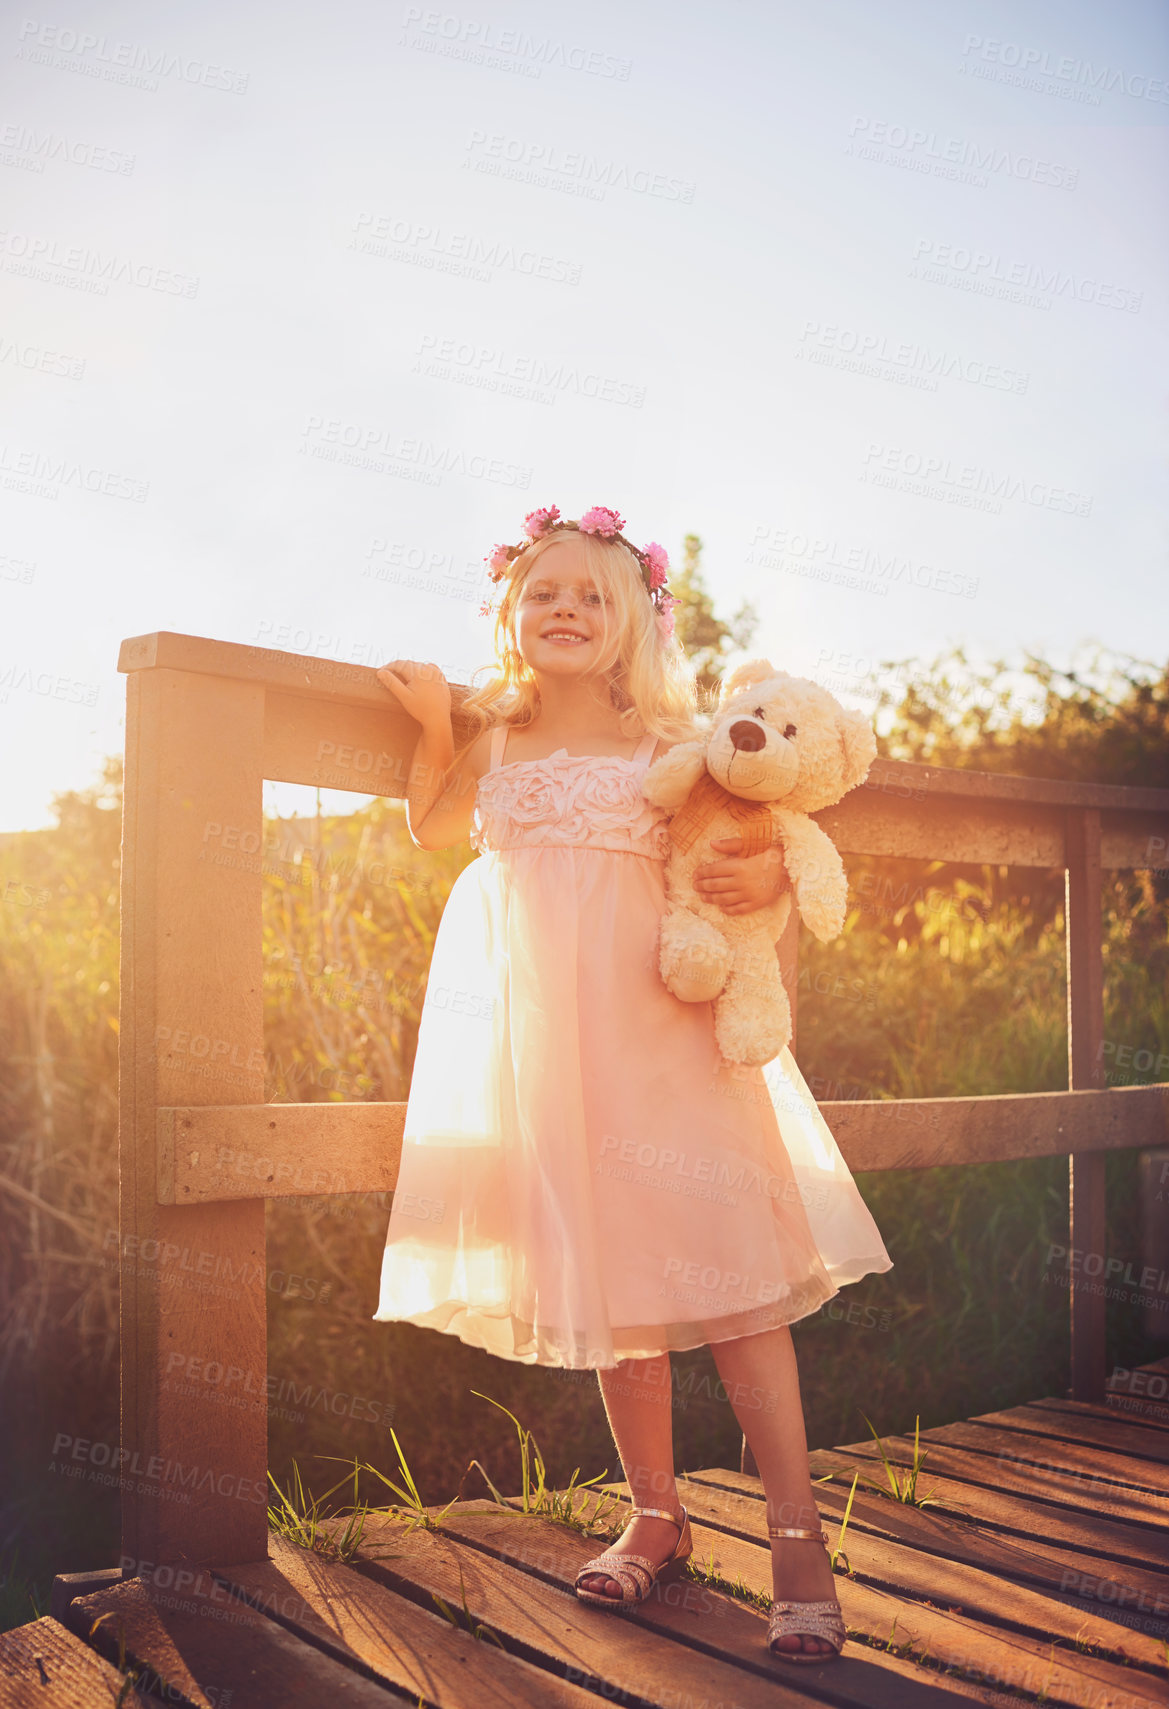 Buy stock photo Shot of a happy little girl holding a teddy bear and looking at the camera while standing on a bridge